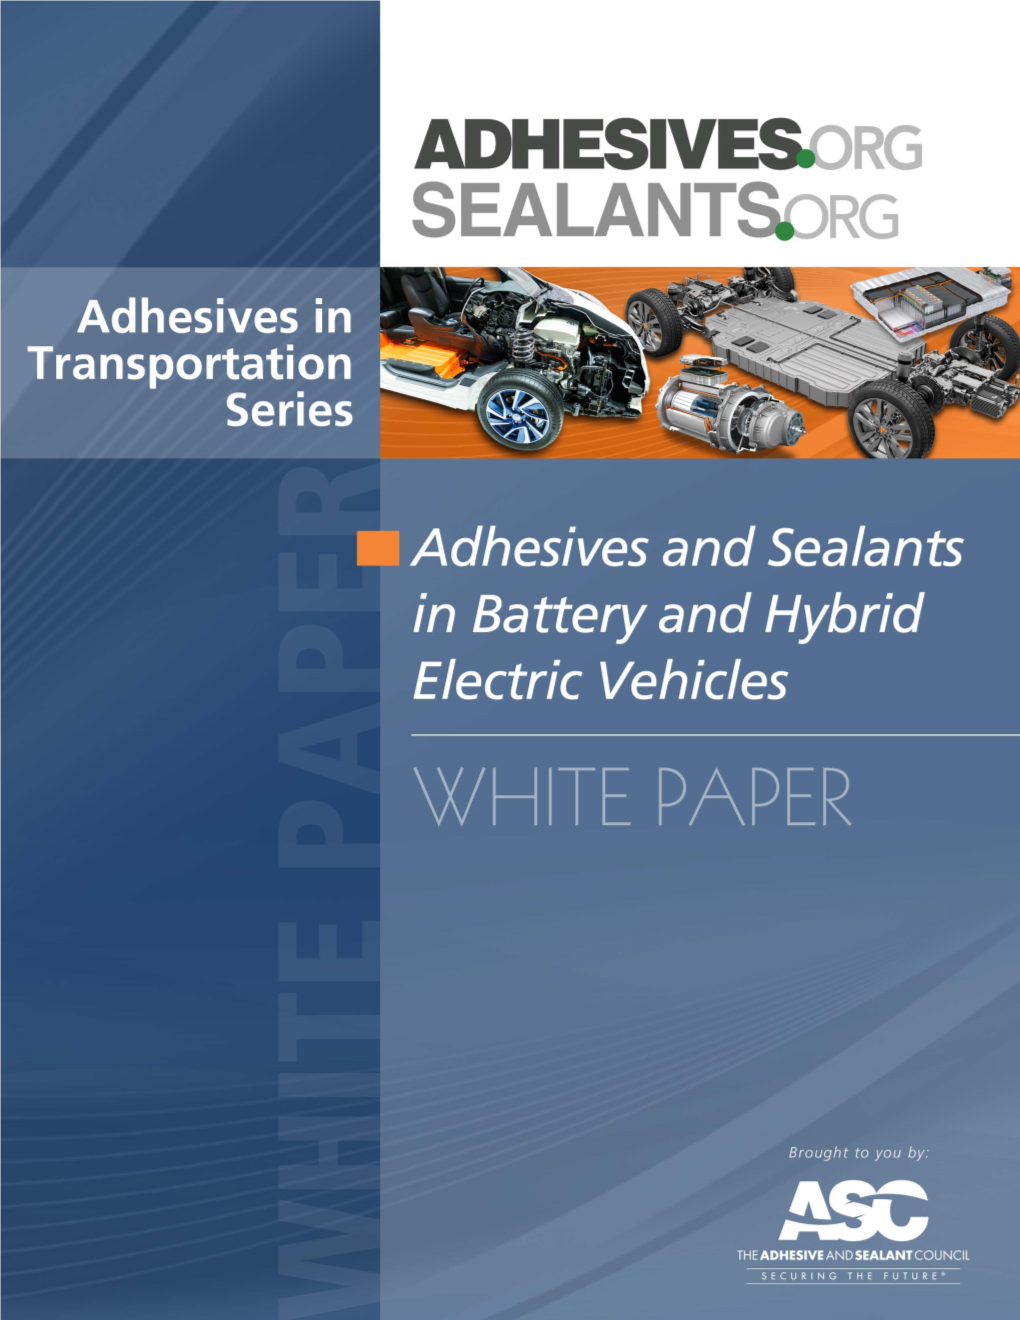 Adhesives and Sealants in Battery and Hybrid Electric Vehicles